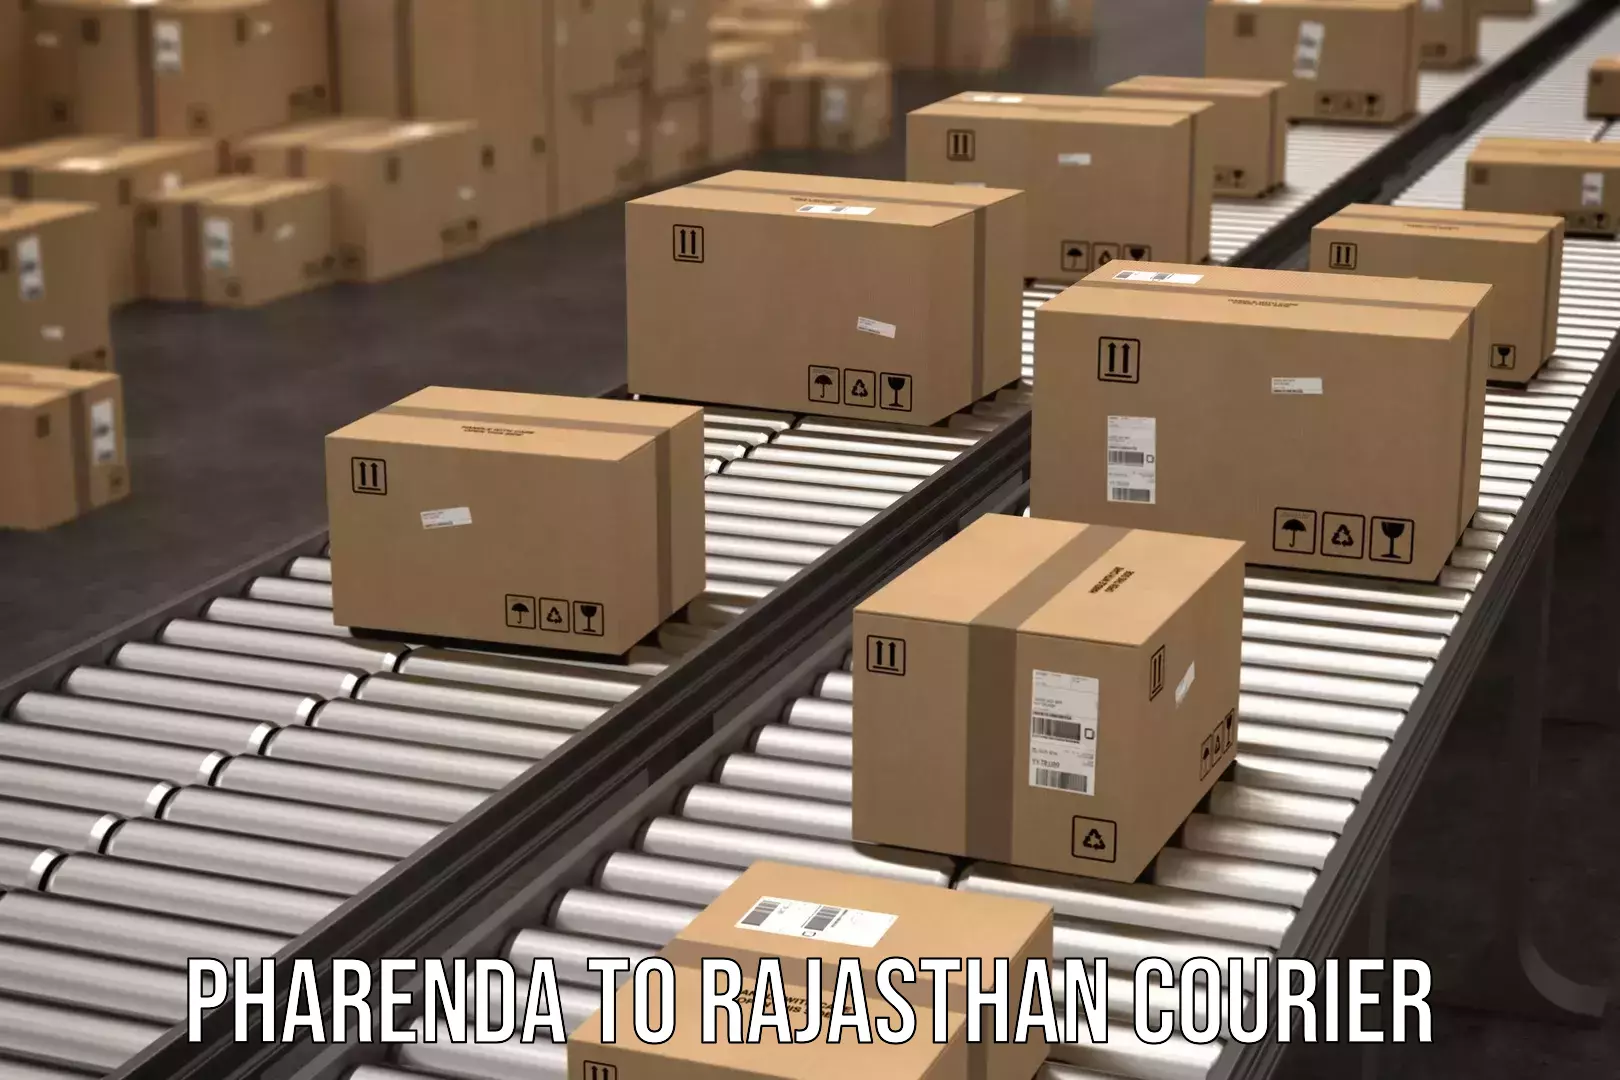 Efficient courier operations Pharenda to Mathania